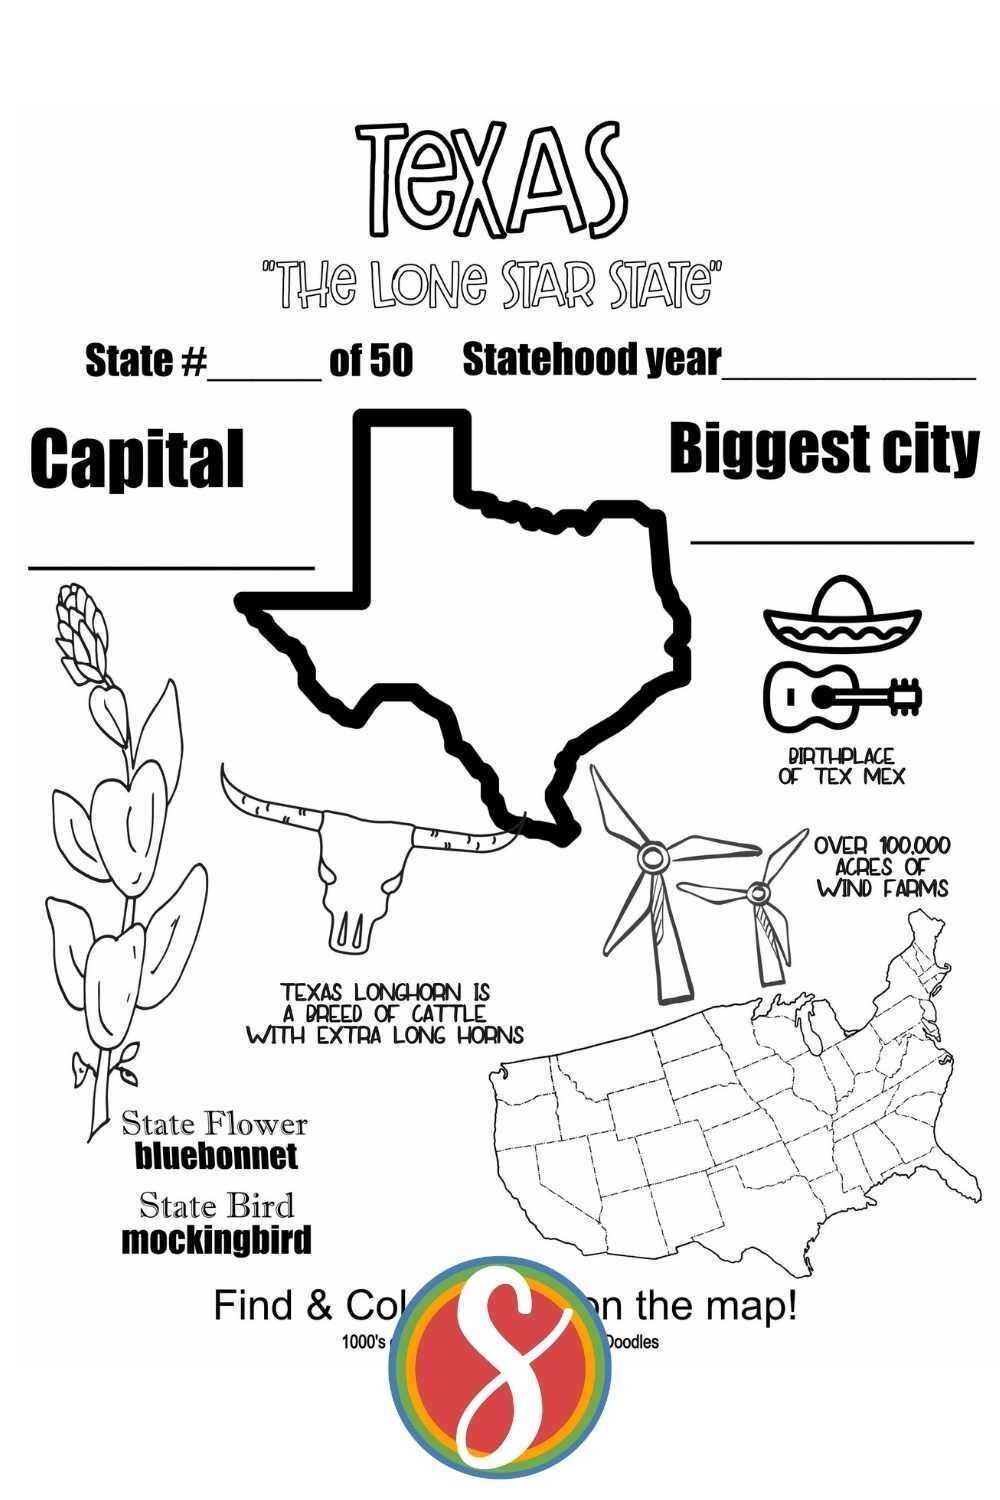 Texas  facts - a free activity coloring page about Texas from Stevie Doodles, free to print and color. Find 1000’s of free printable coloring sheets of all kinds at Stevie Doodles